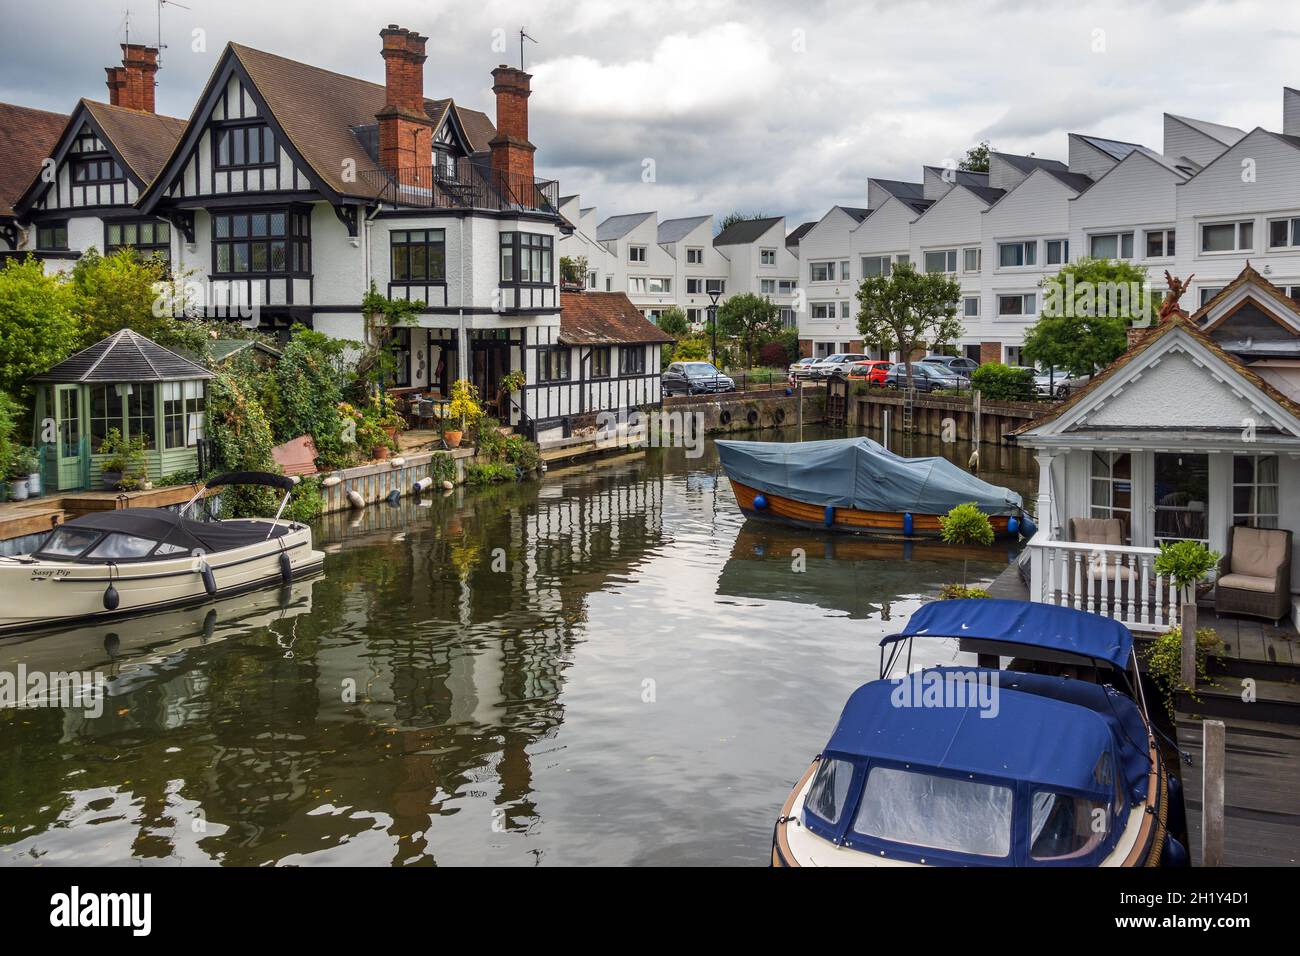 Houses and flats beside Marlow Lock on the River Thames in Marlow, Buckinghamshire, England. Stock Photo